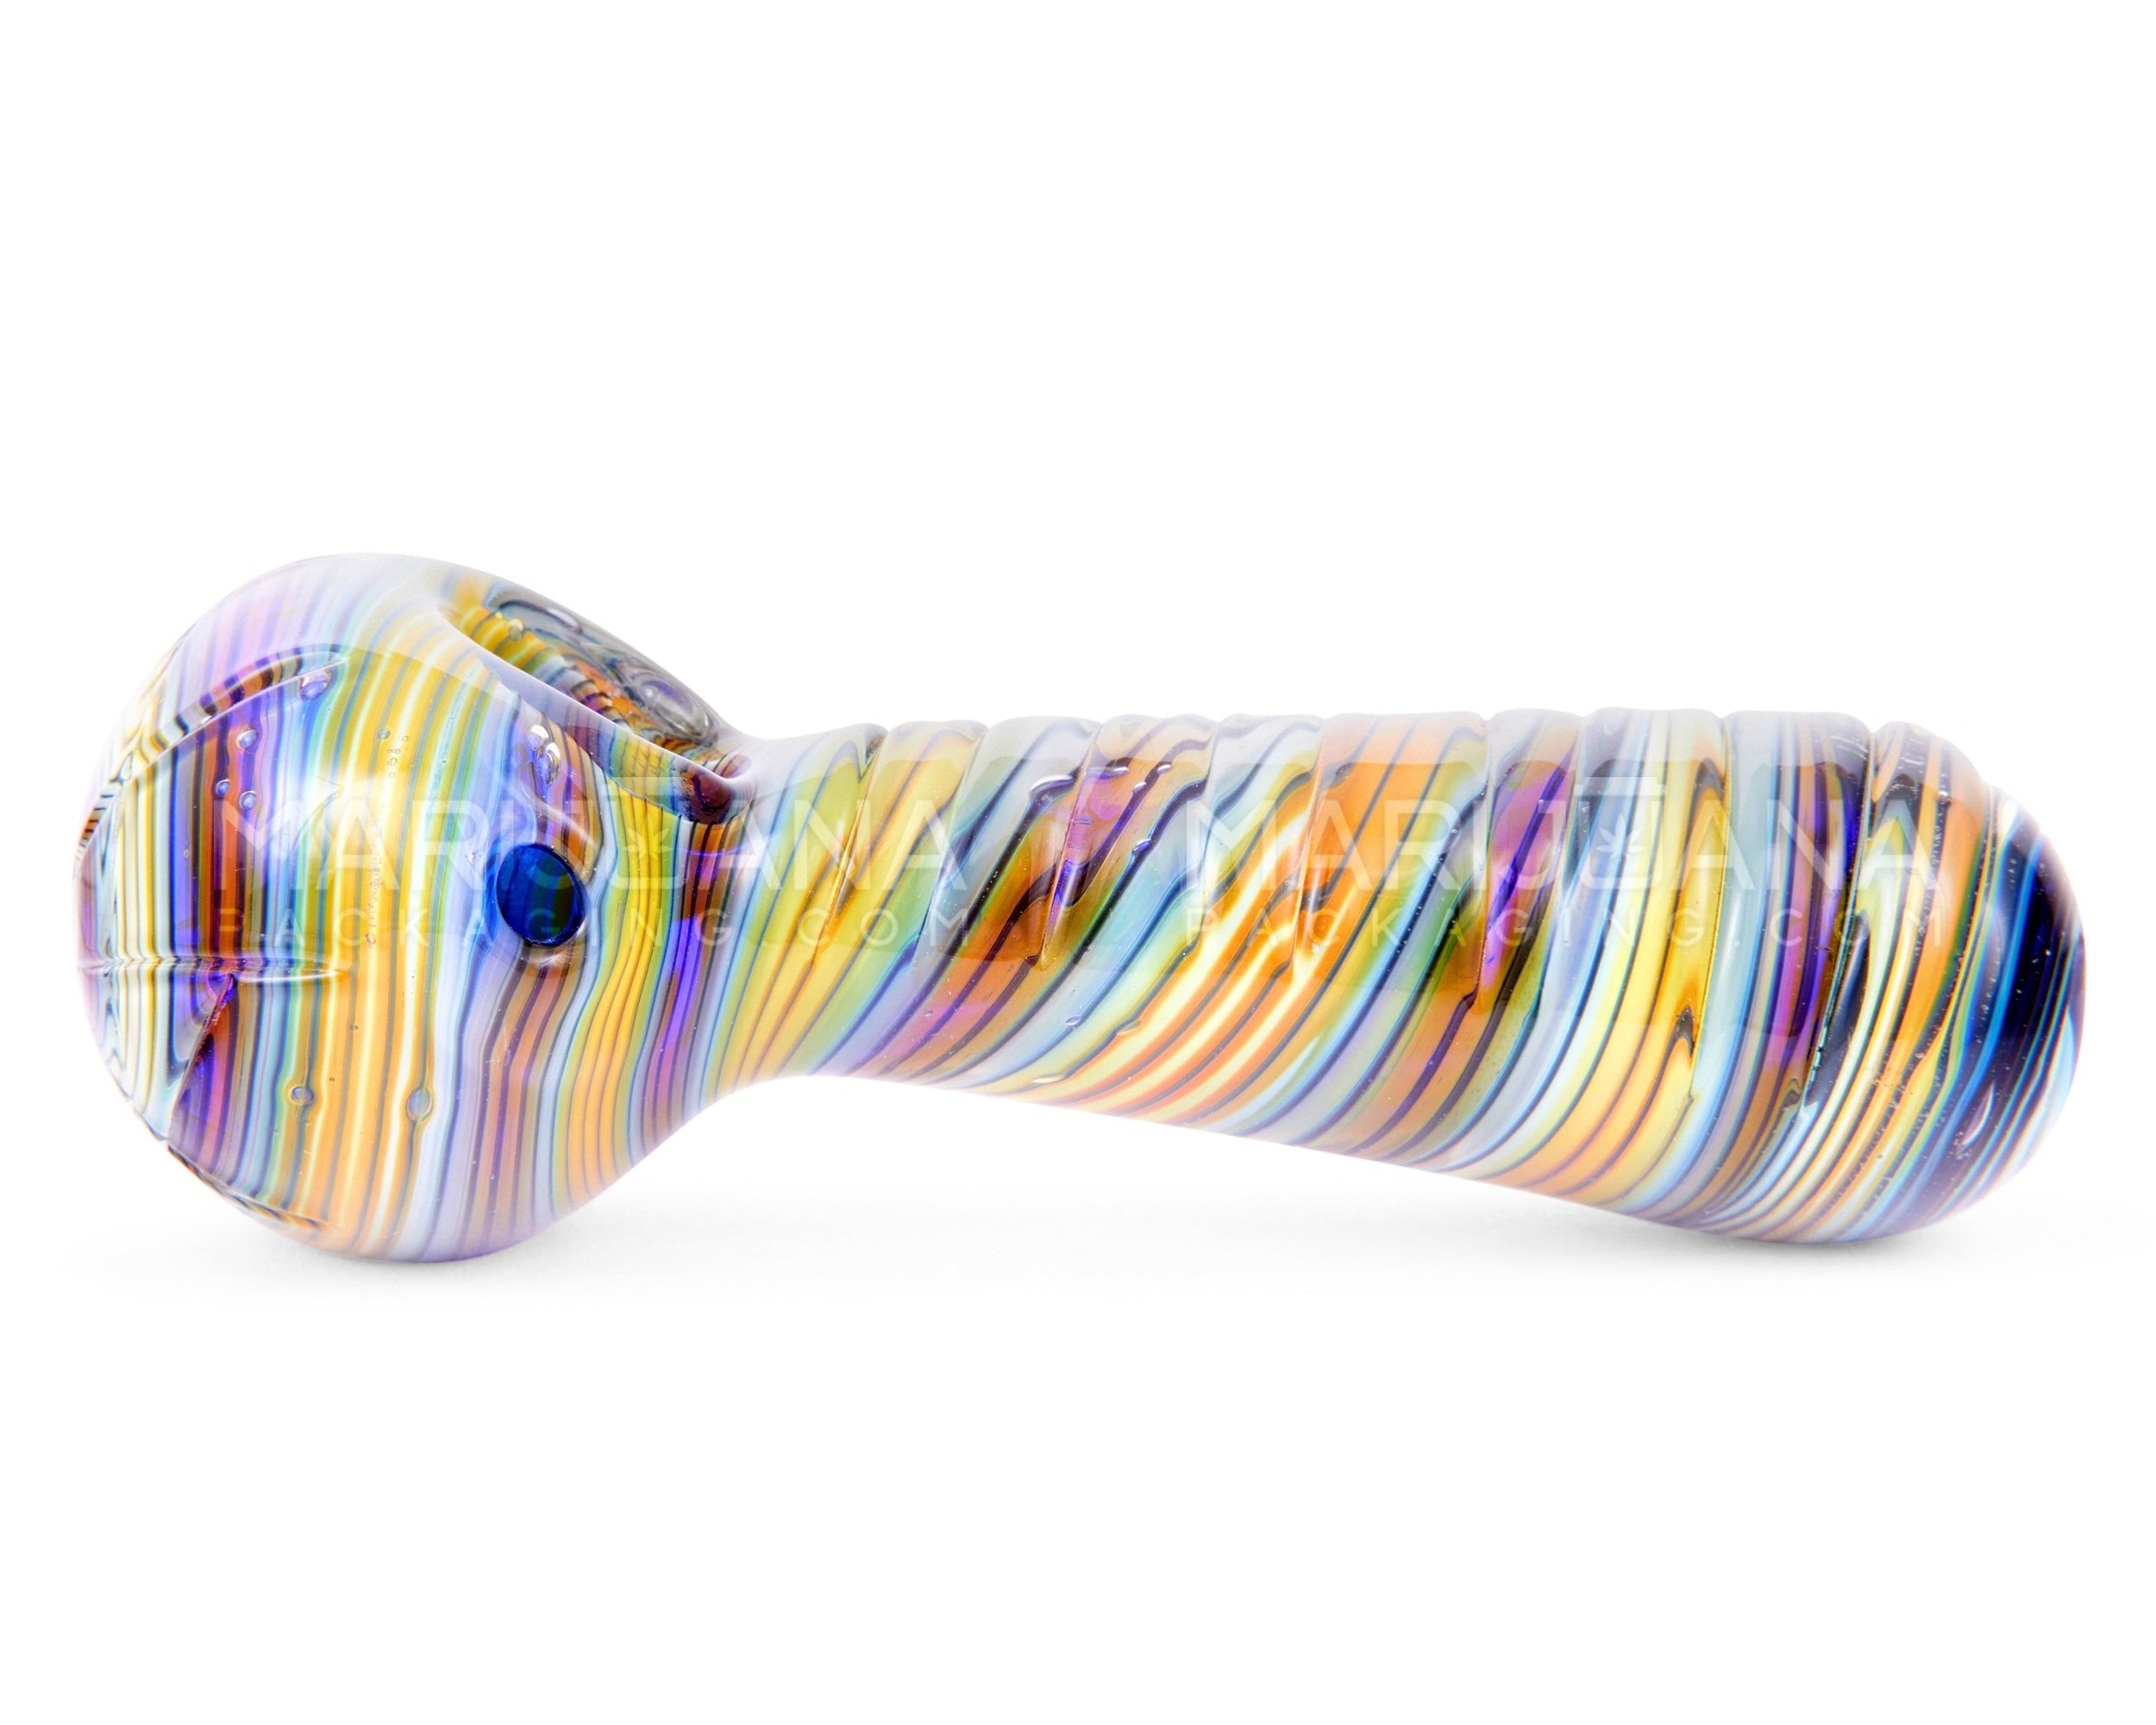 Spiral Ridged Cut Spoon Hand Pipe | 5.5in Long - Glass - Assorted - 5